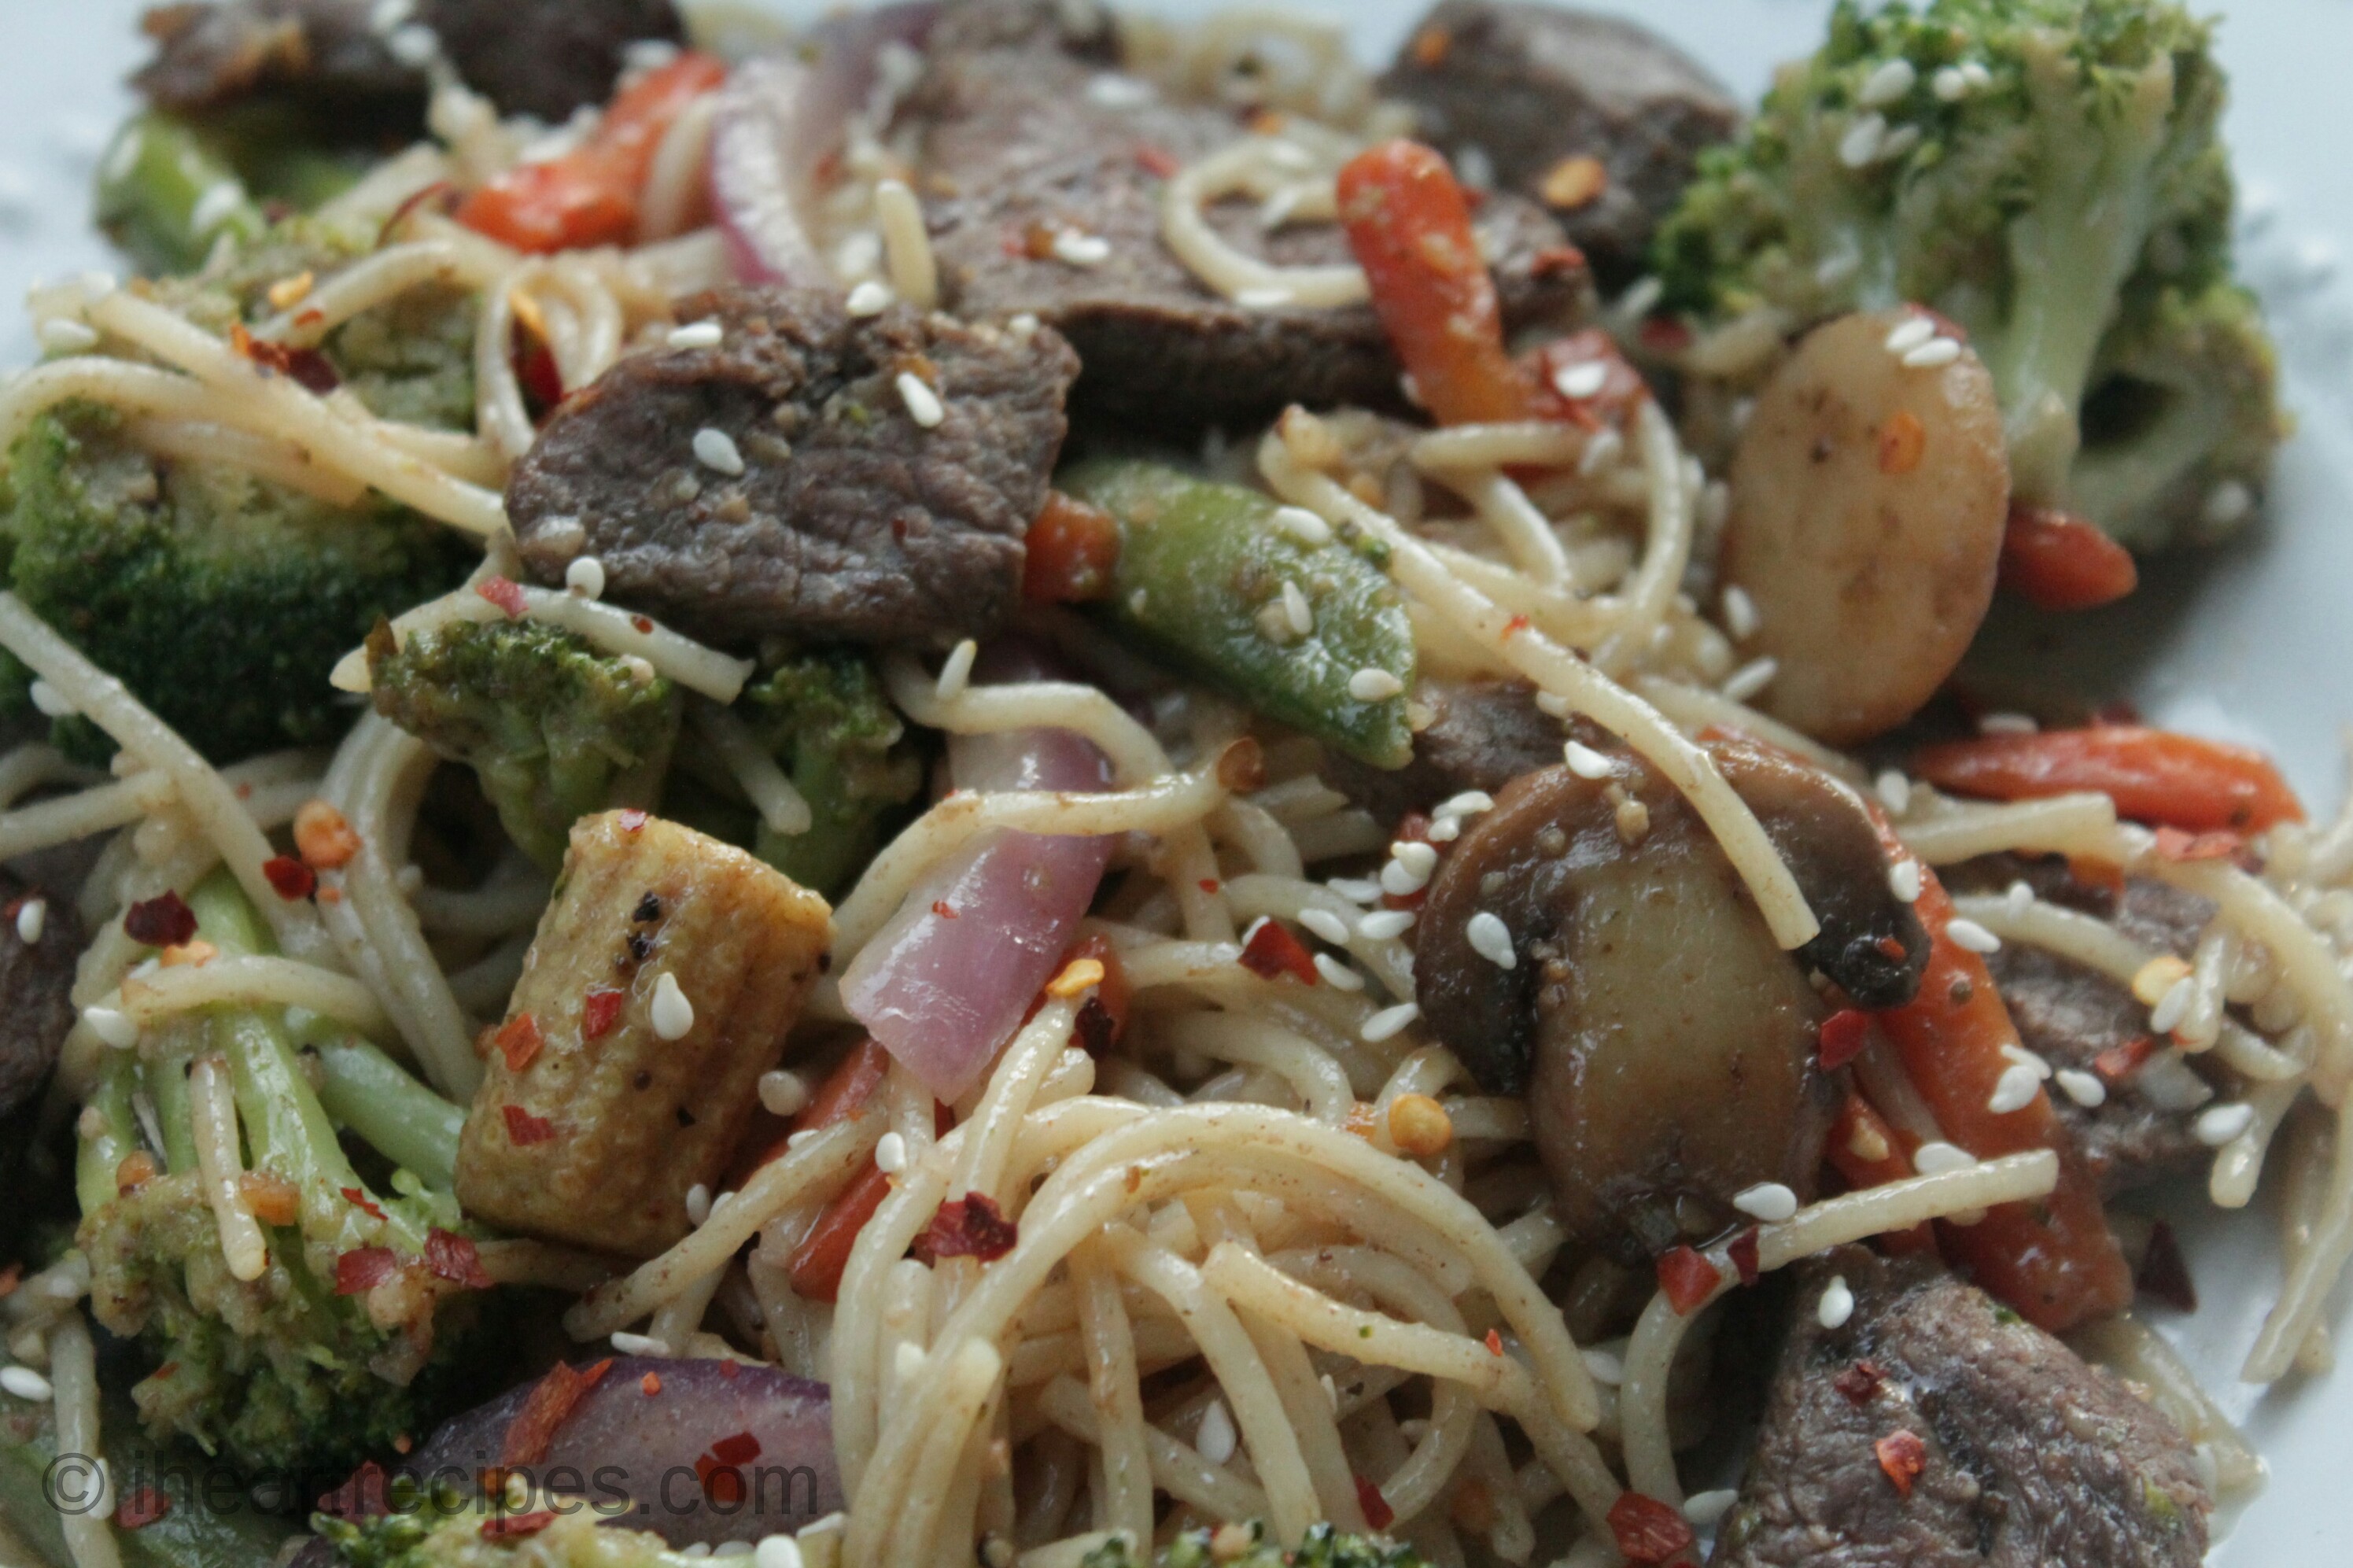 A close up image of an easy beef and vegetable stir fry with noodles served in a bowl. The stir fry contains broccoli, mini corn, peppers, and onions with marinated steak and spaghetti noodles.